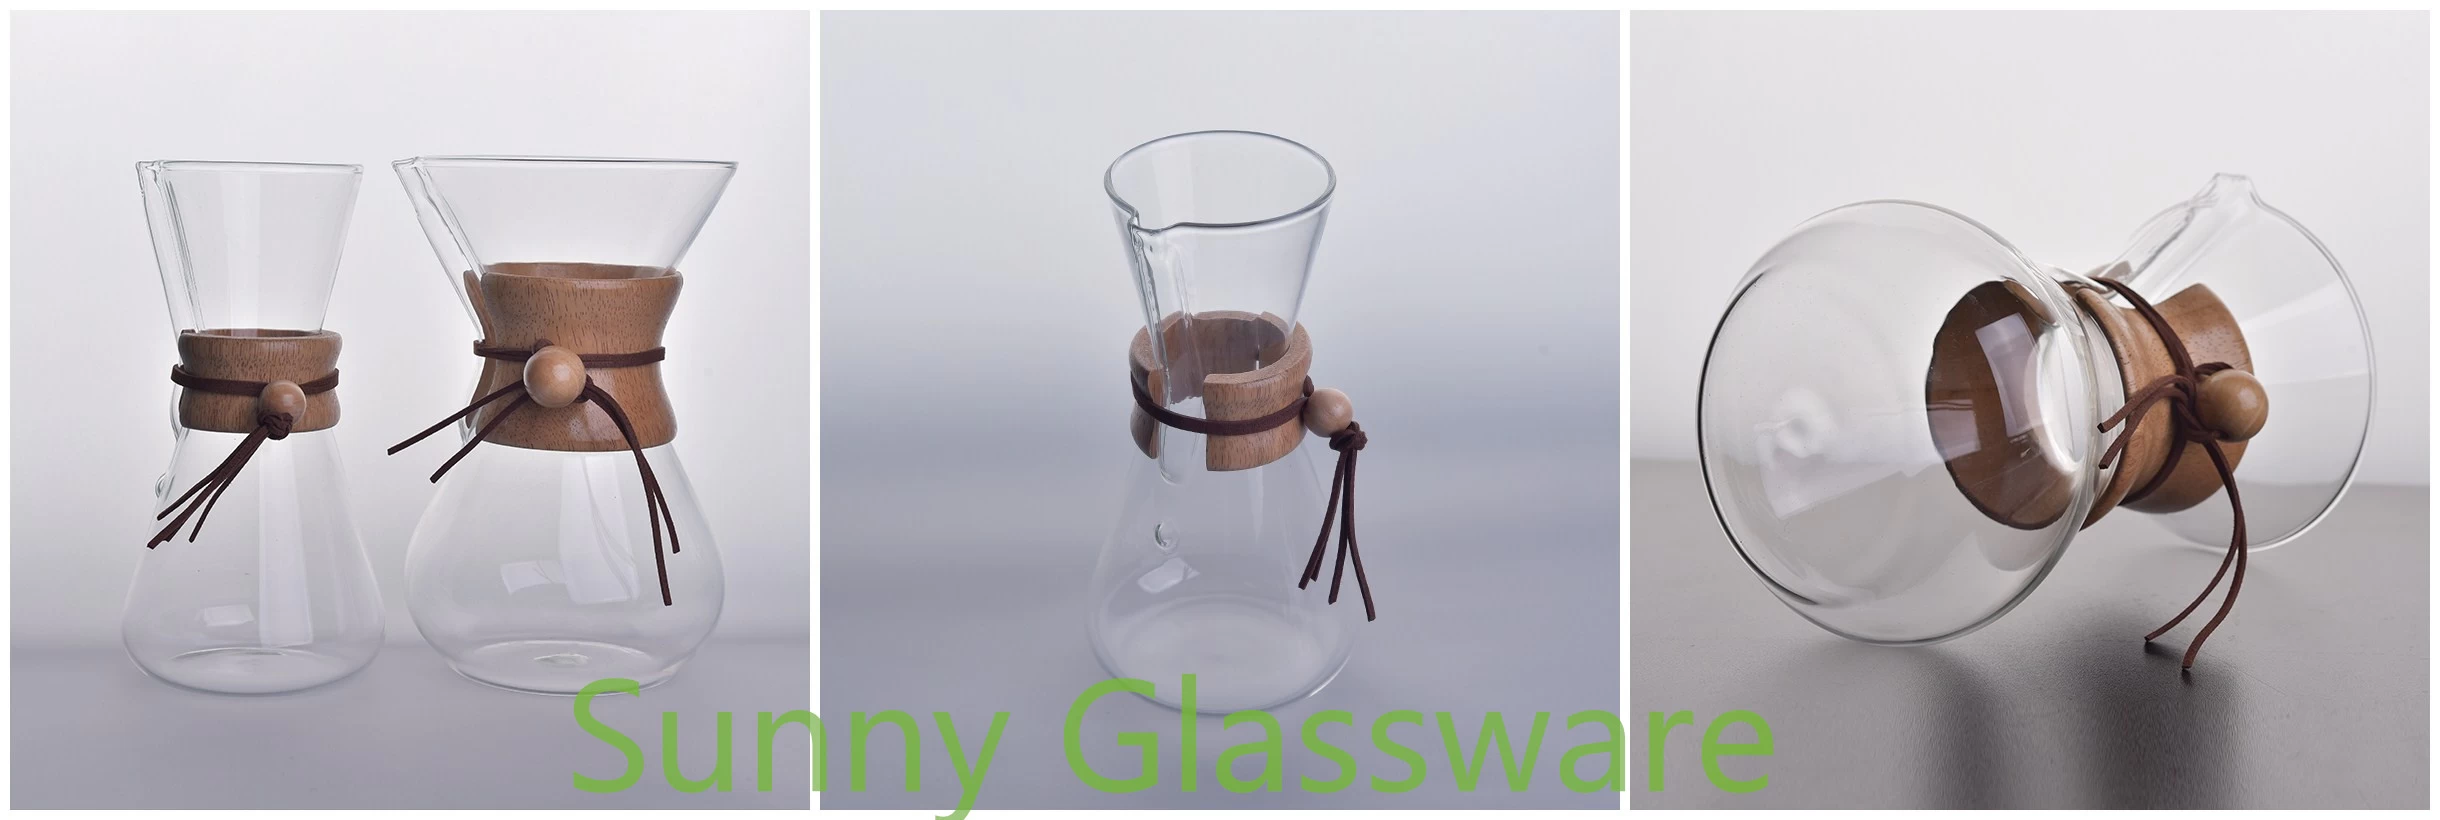 Pour-Over Glass Coffee Maker with Wood Collar